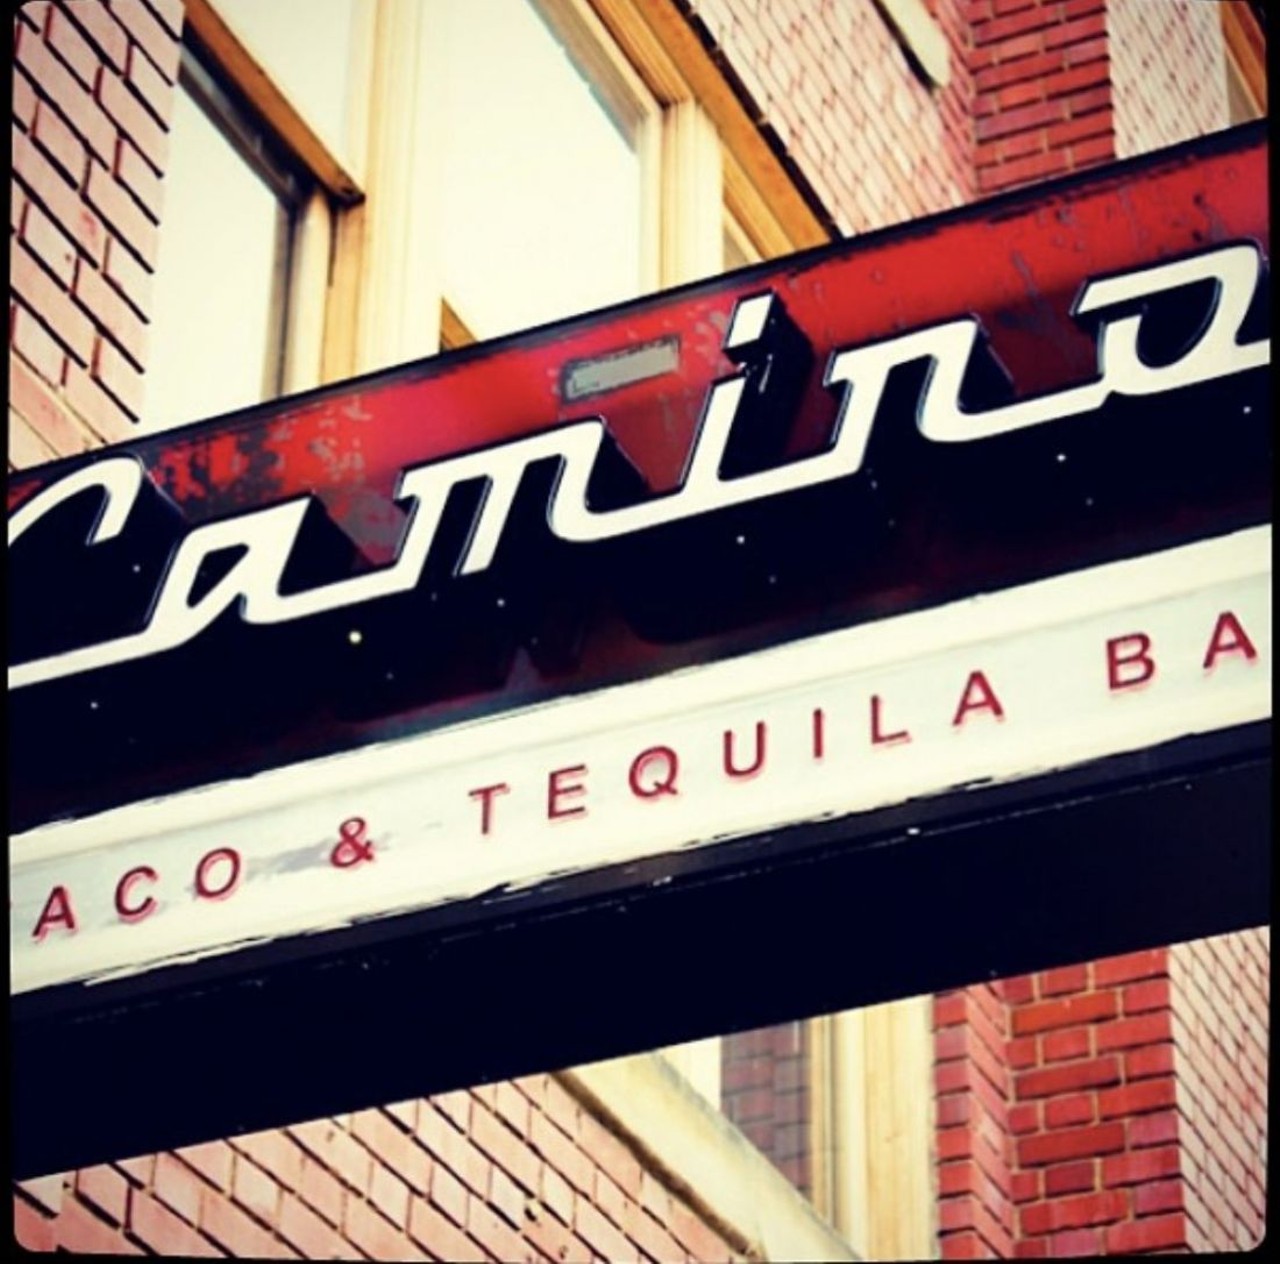  Camino Taco and Tequila Bar
1300 West Ninth St., Cleveland
This contemporary taco and tequila bar, that opened in 2014, fits right into the Warehouse District neighborhood it calls home. This locally owned spot keeps things simple with a streamlined menu that focuses on snacks, small plates and tacos. A great meal can be made just from the starters, paired with a cold Mexican beer or Margarita.
Photo via @CaminoCleveland/Instagram